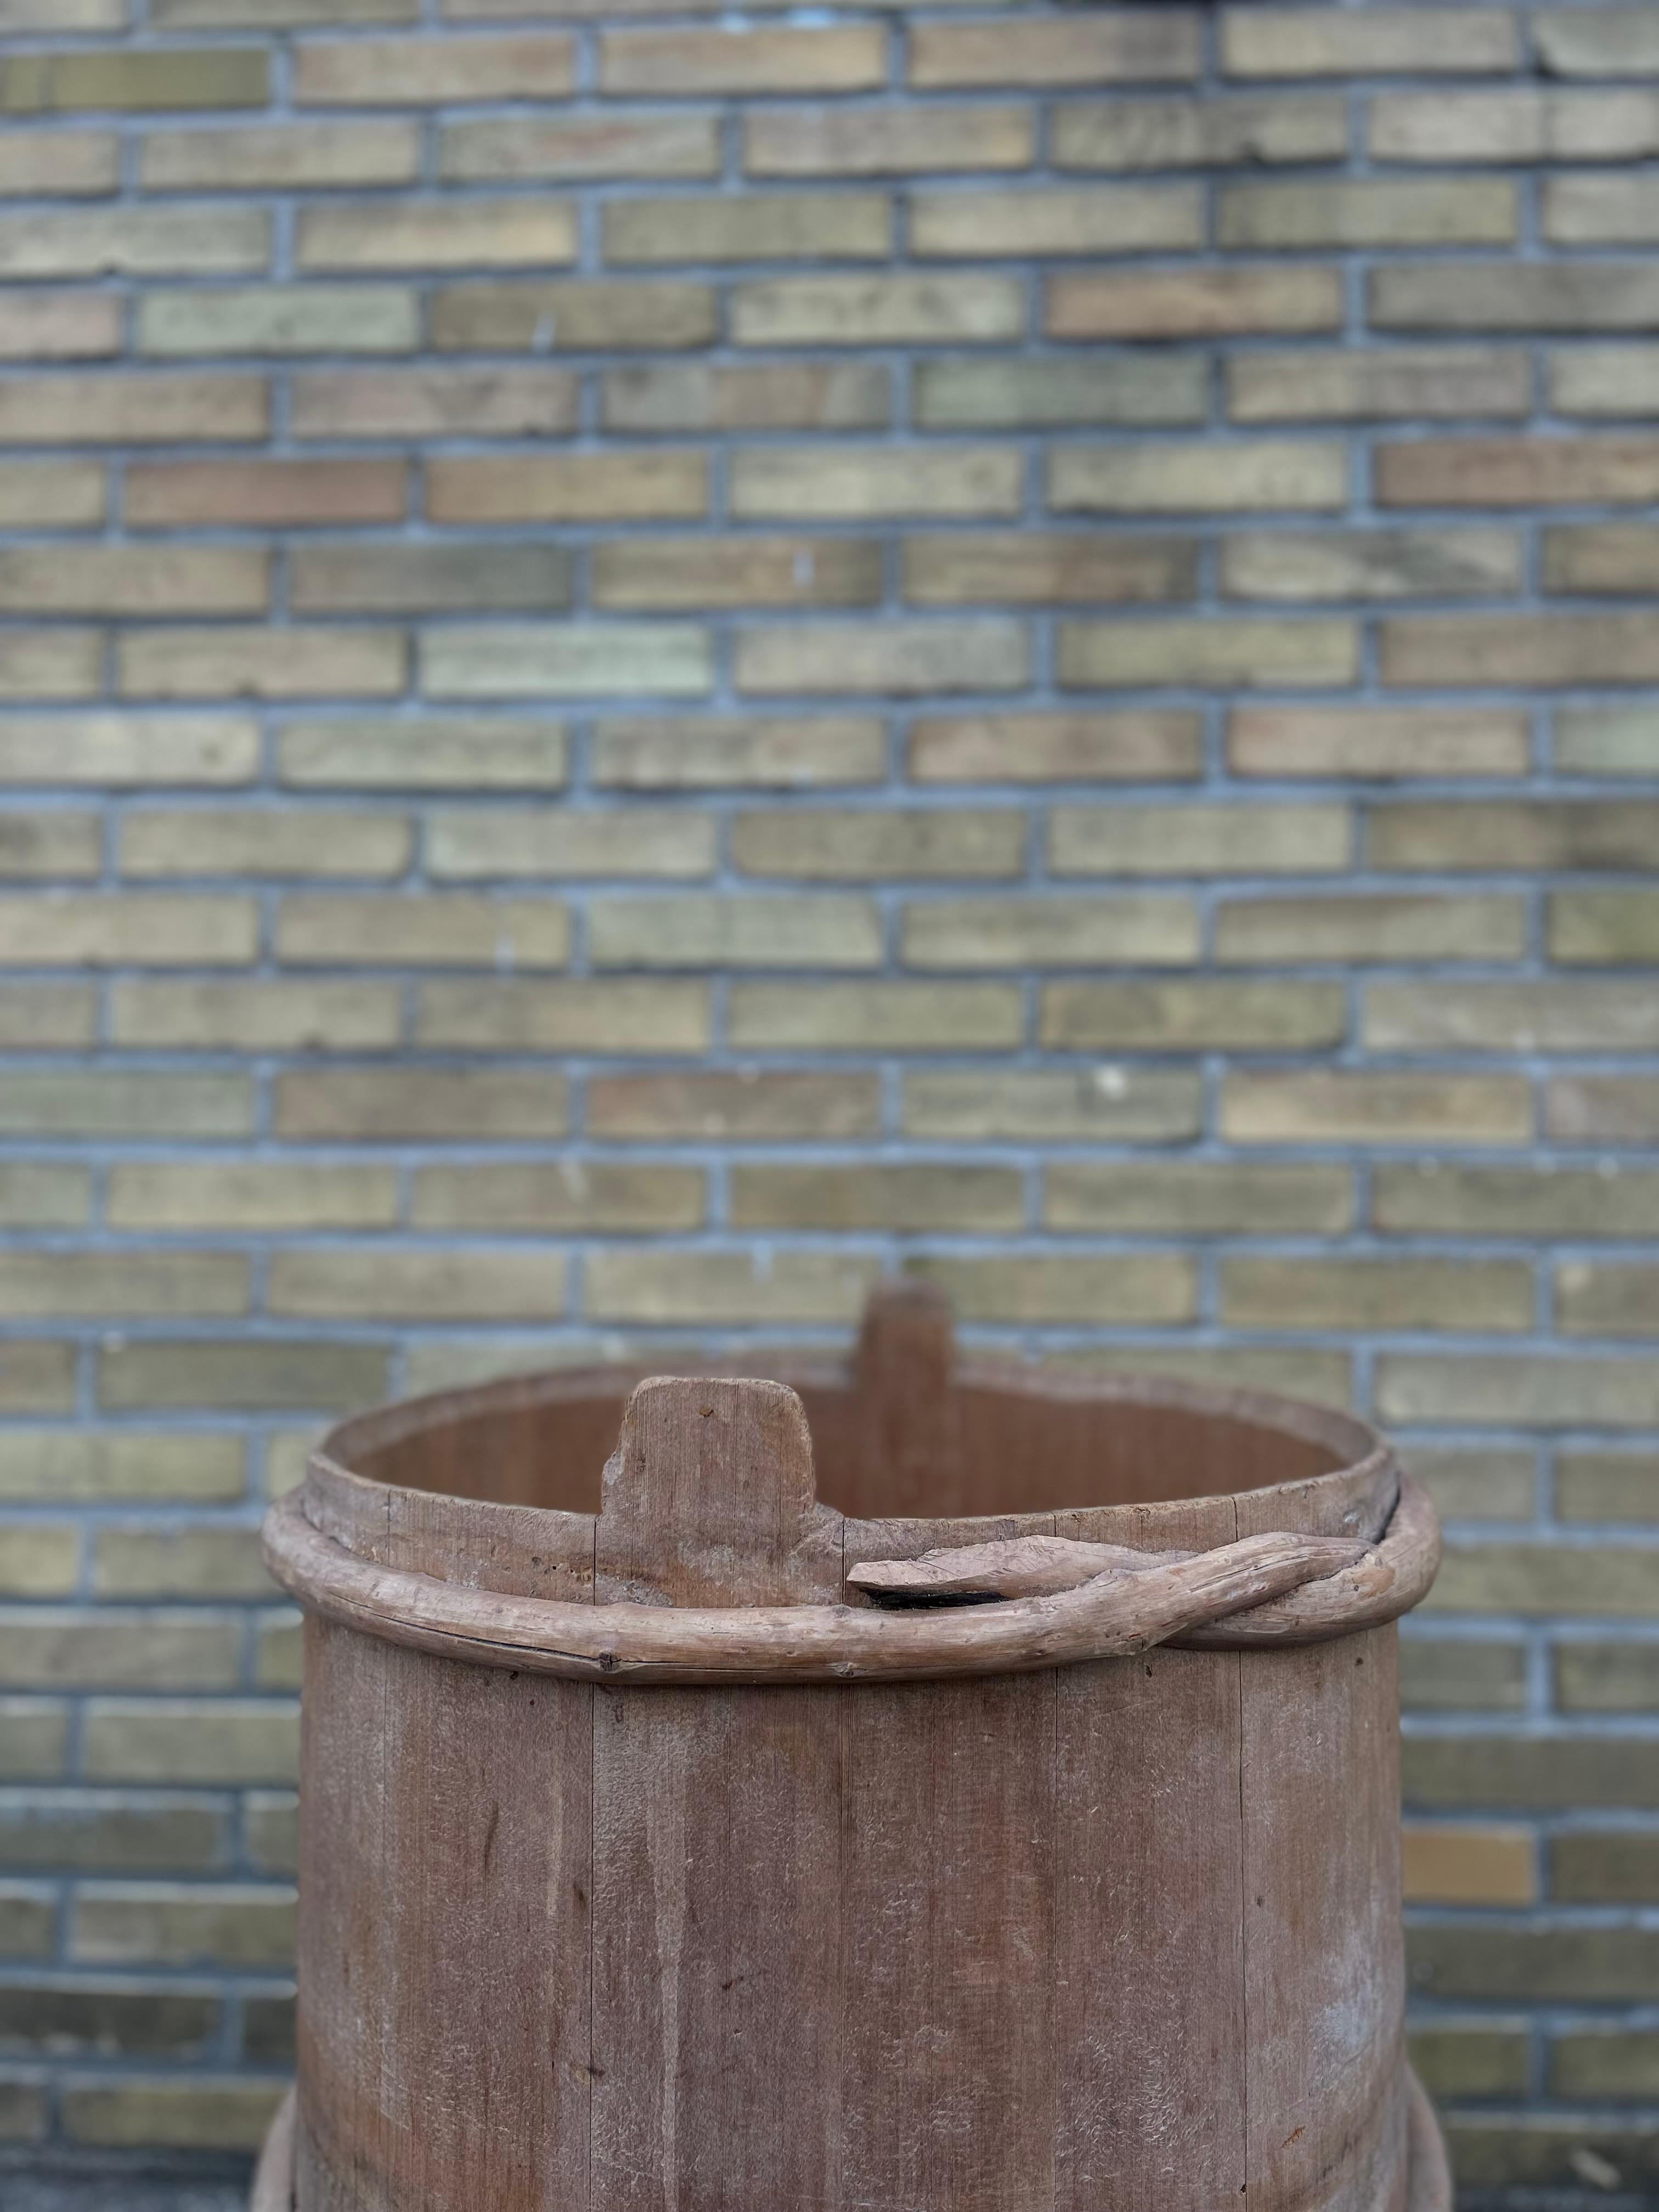 Decorative Rustic Swedish Folk Art Wooden Barrel Planter 1800's In Good Condition For Sale In Valby, 84